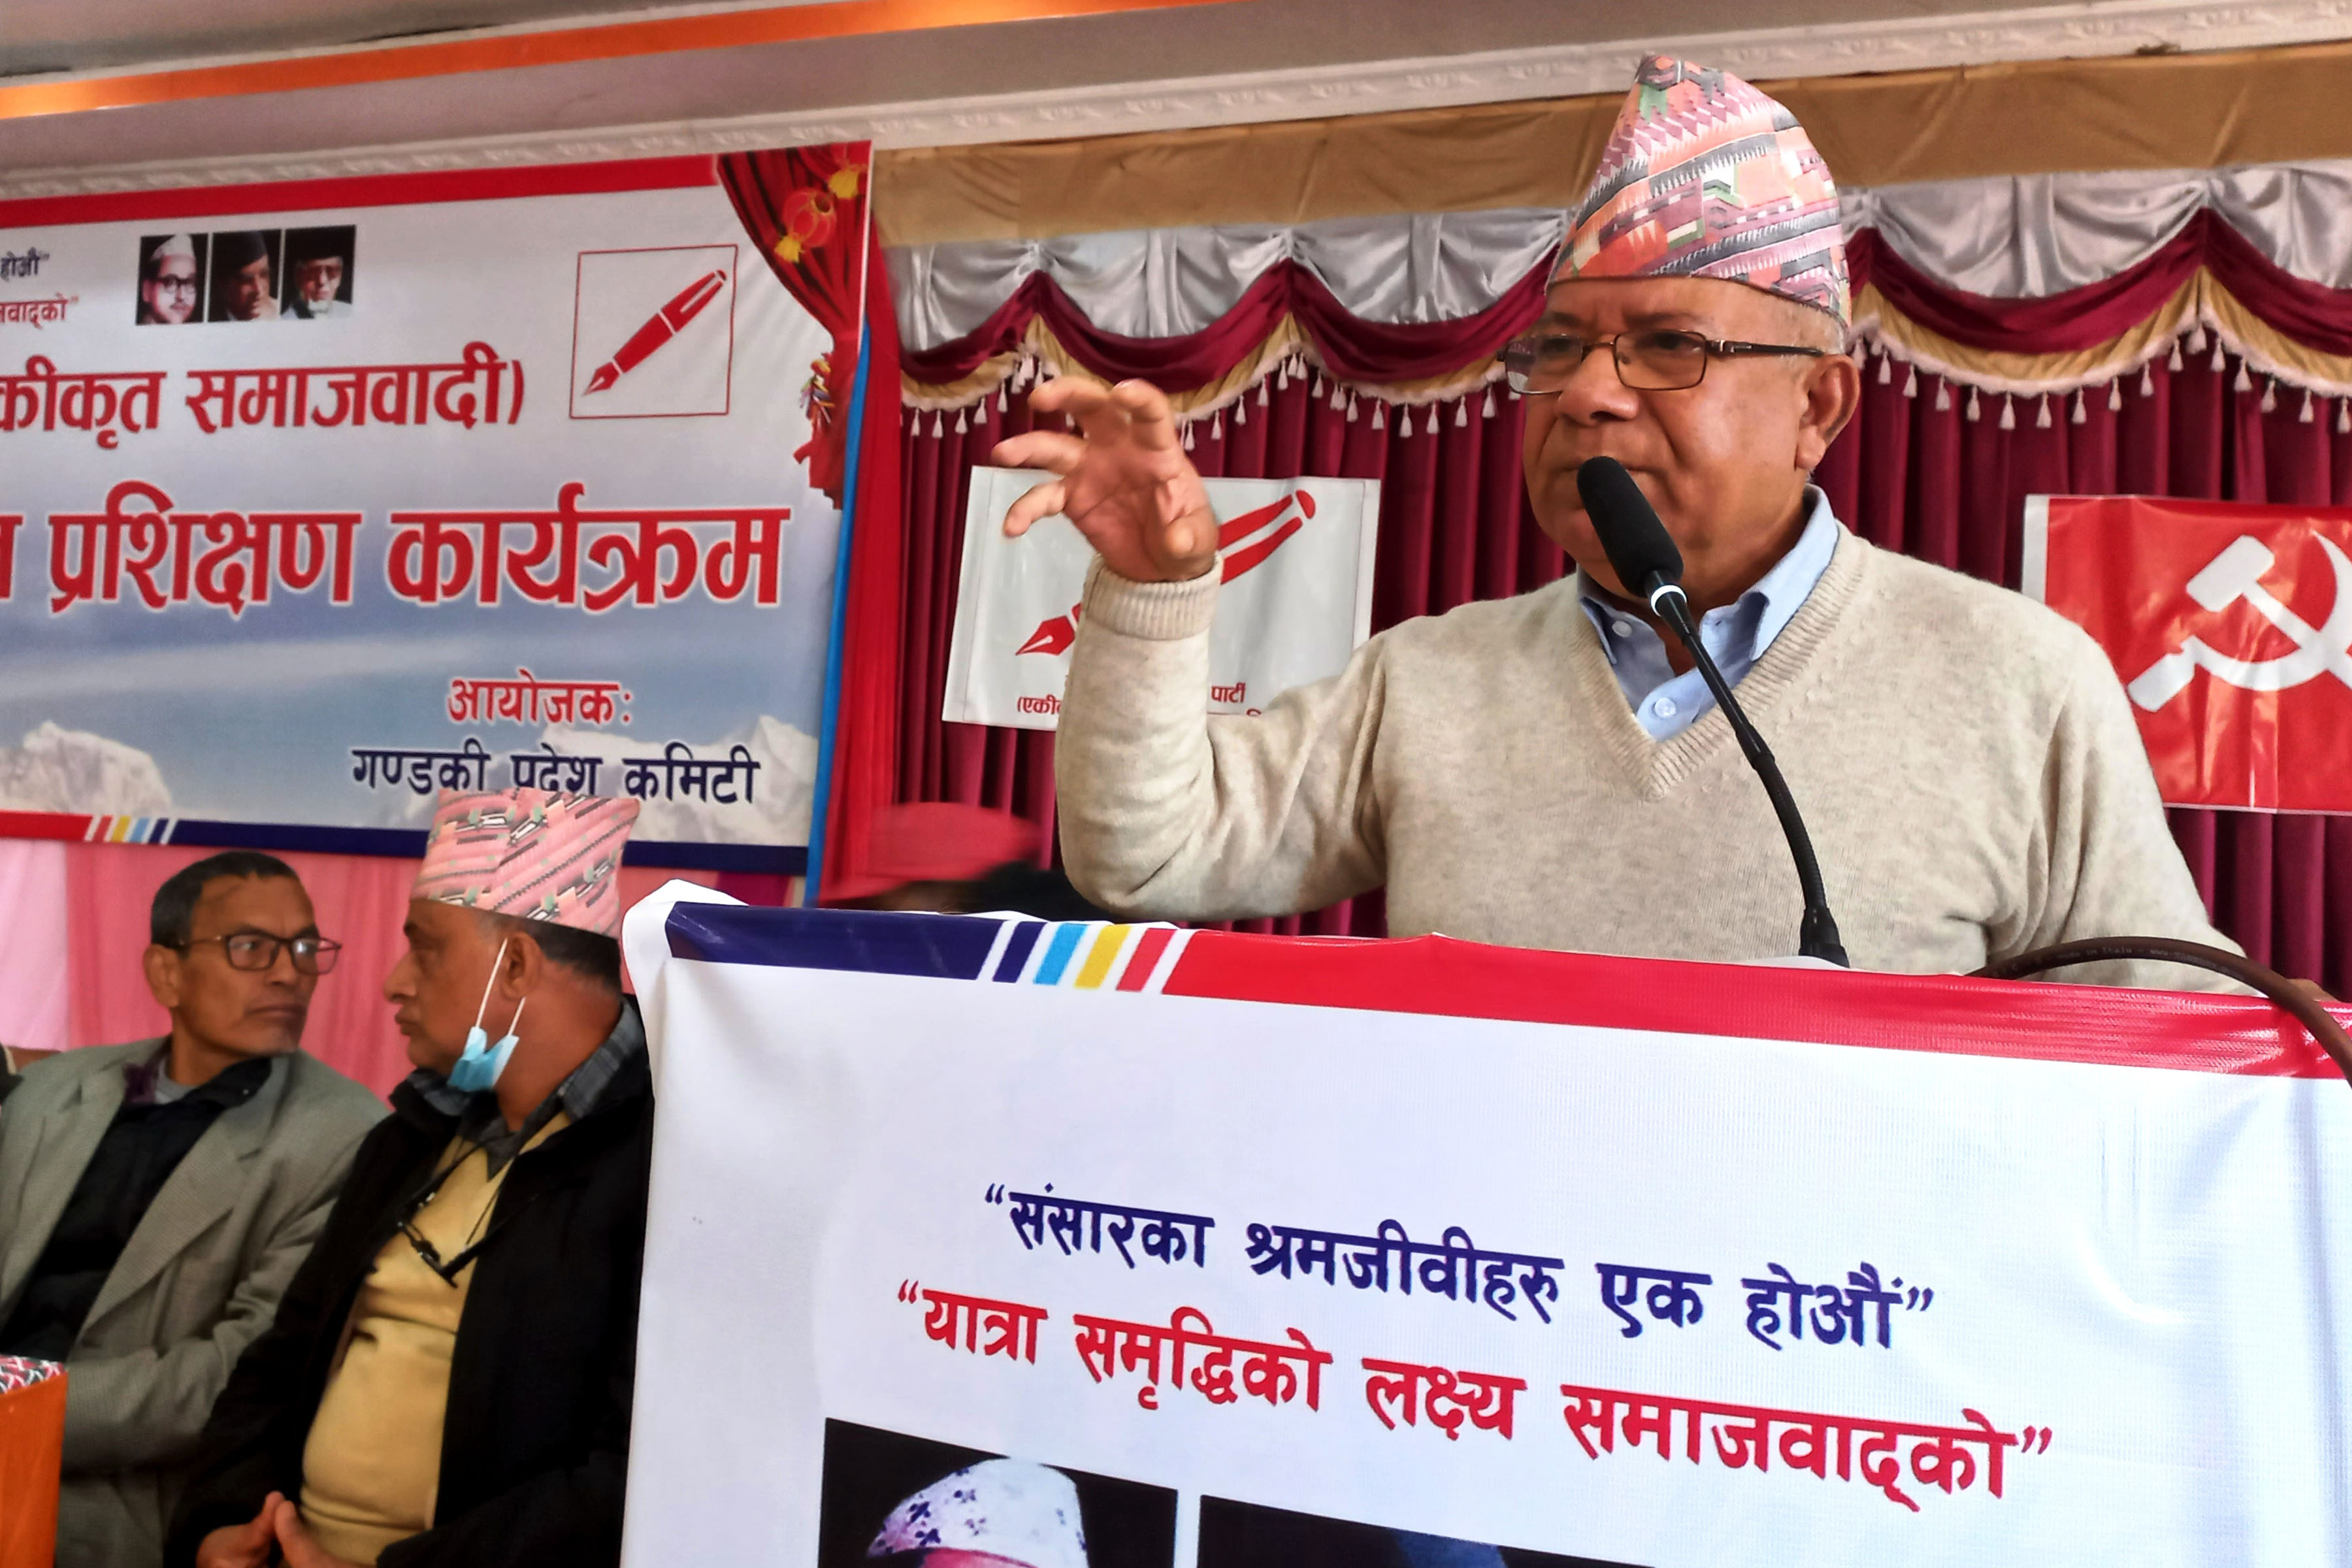 we-are-with-the-speaker-cpn-us-chair-nepal-says